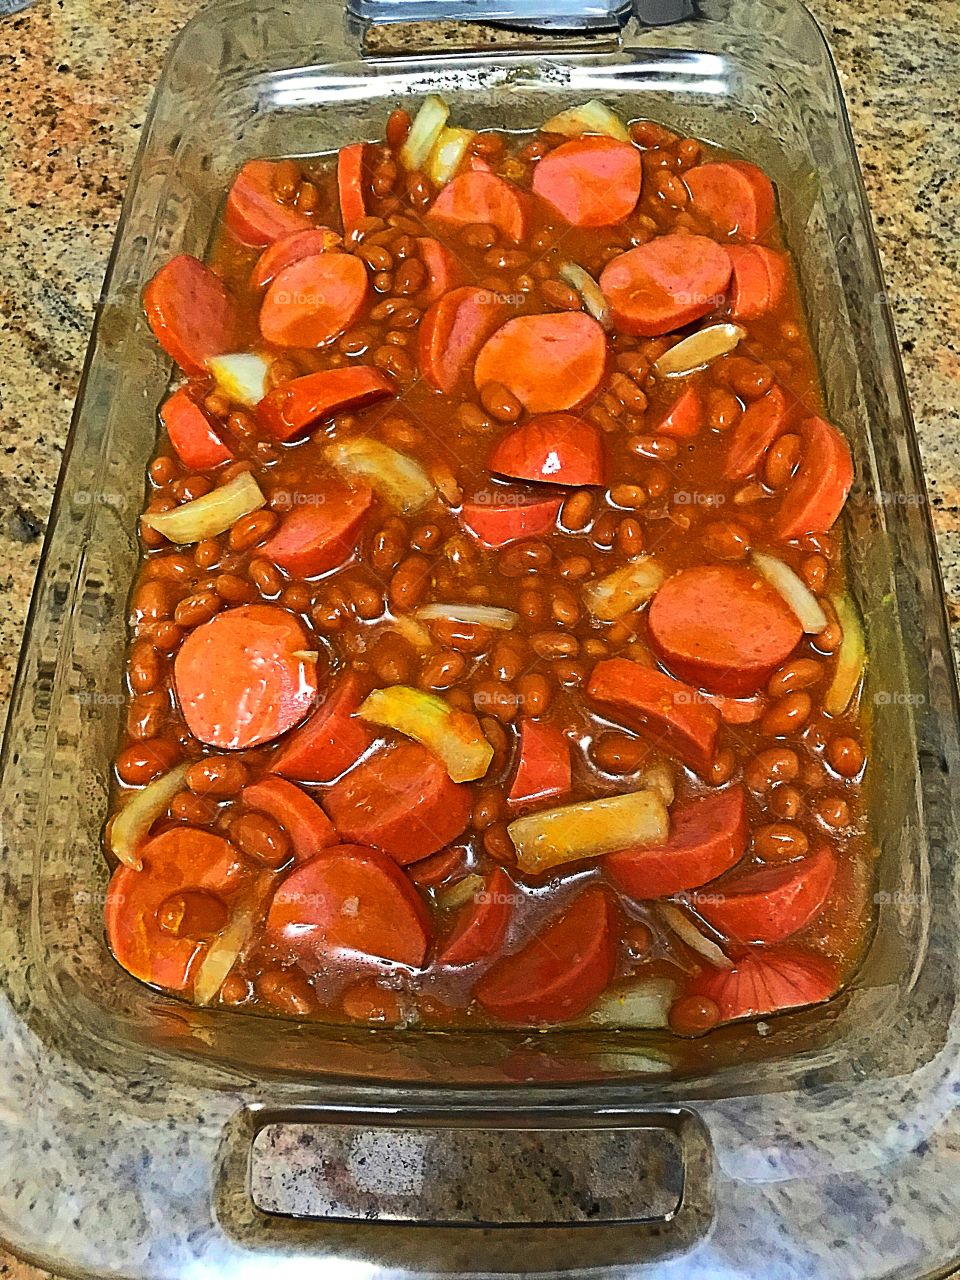 Franks and beans 